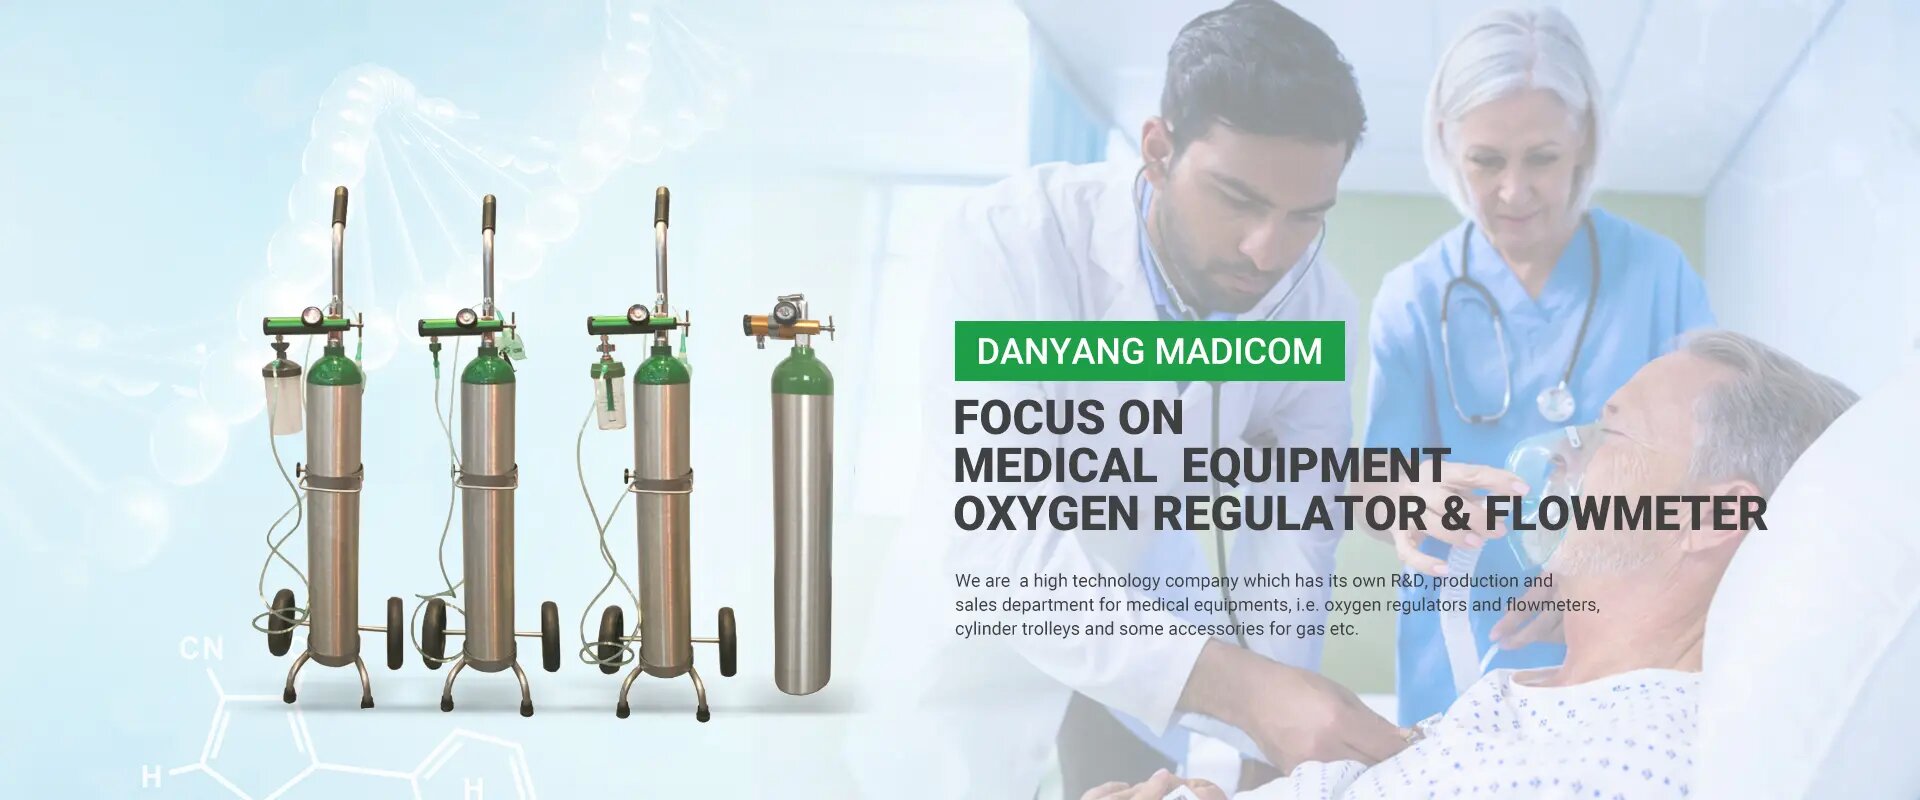 What knowledge do you know about the seemingly simple oxygen cylinder?